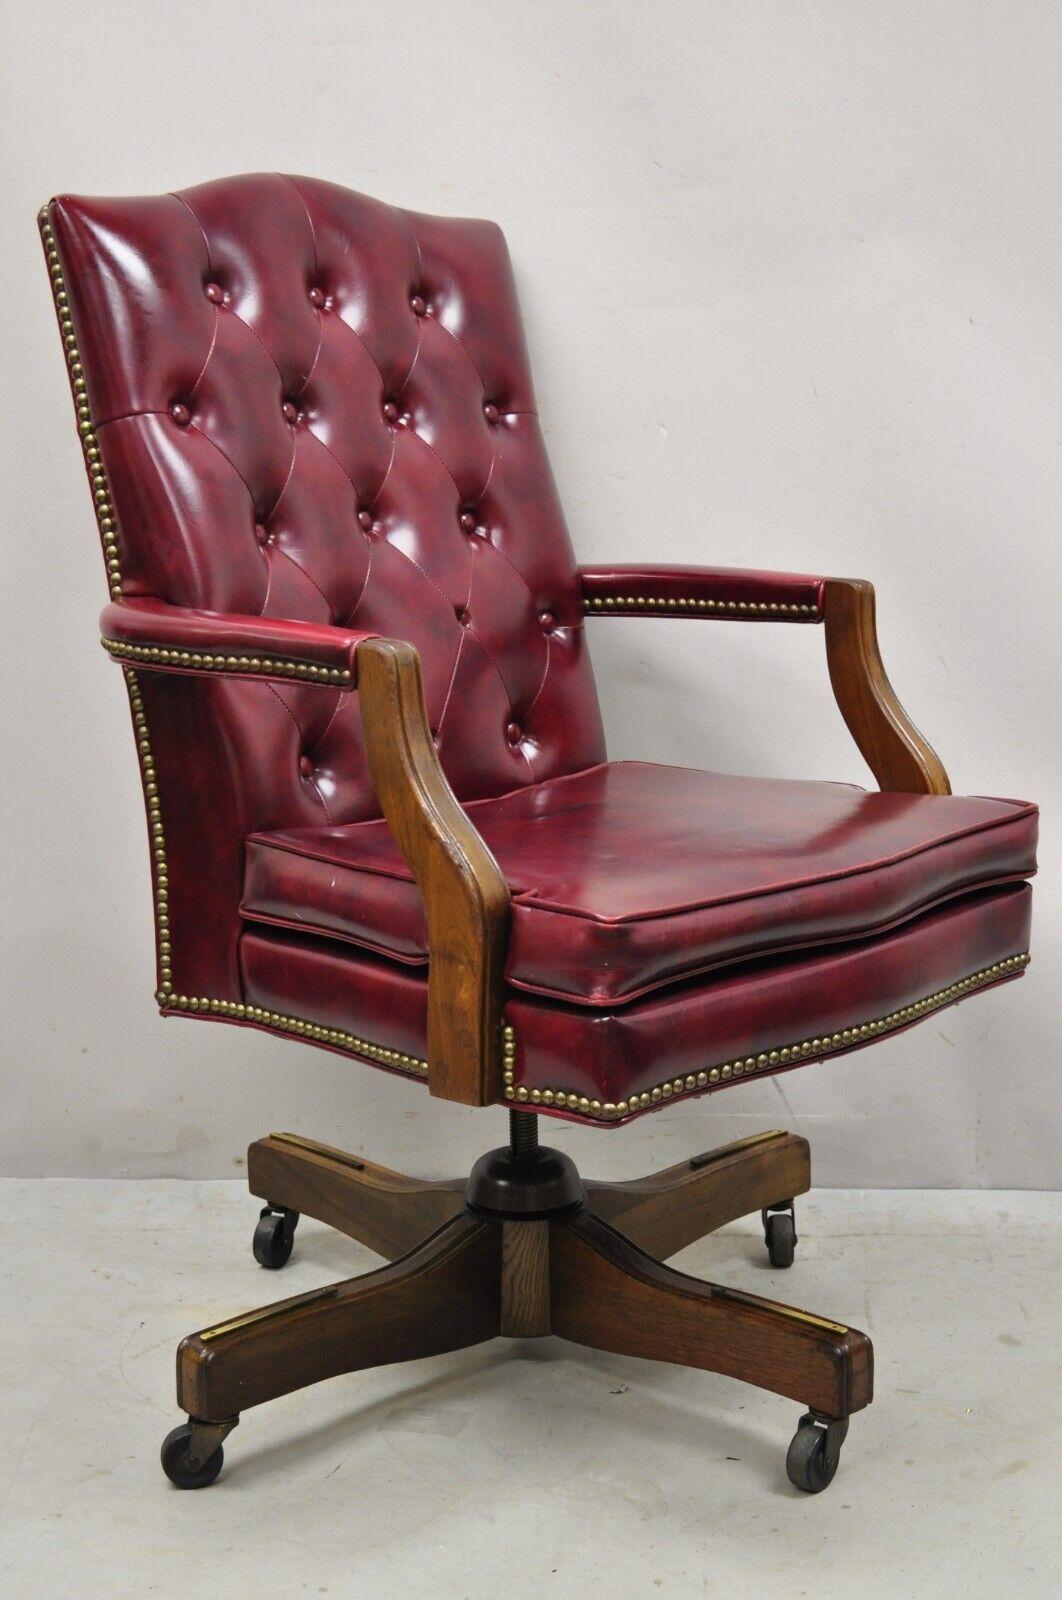 Vintage Oxblood Burgundy Naugahyde Chesterfield Style Swivel Office Desk Executive Chair. Item features a swivel and tilt seat, adjustable height, oxblood burgundy button tufted naugahyde/vinyl upholstery, very nice vintage item. Circa Mid to Late